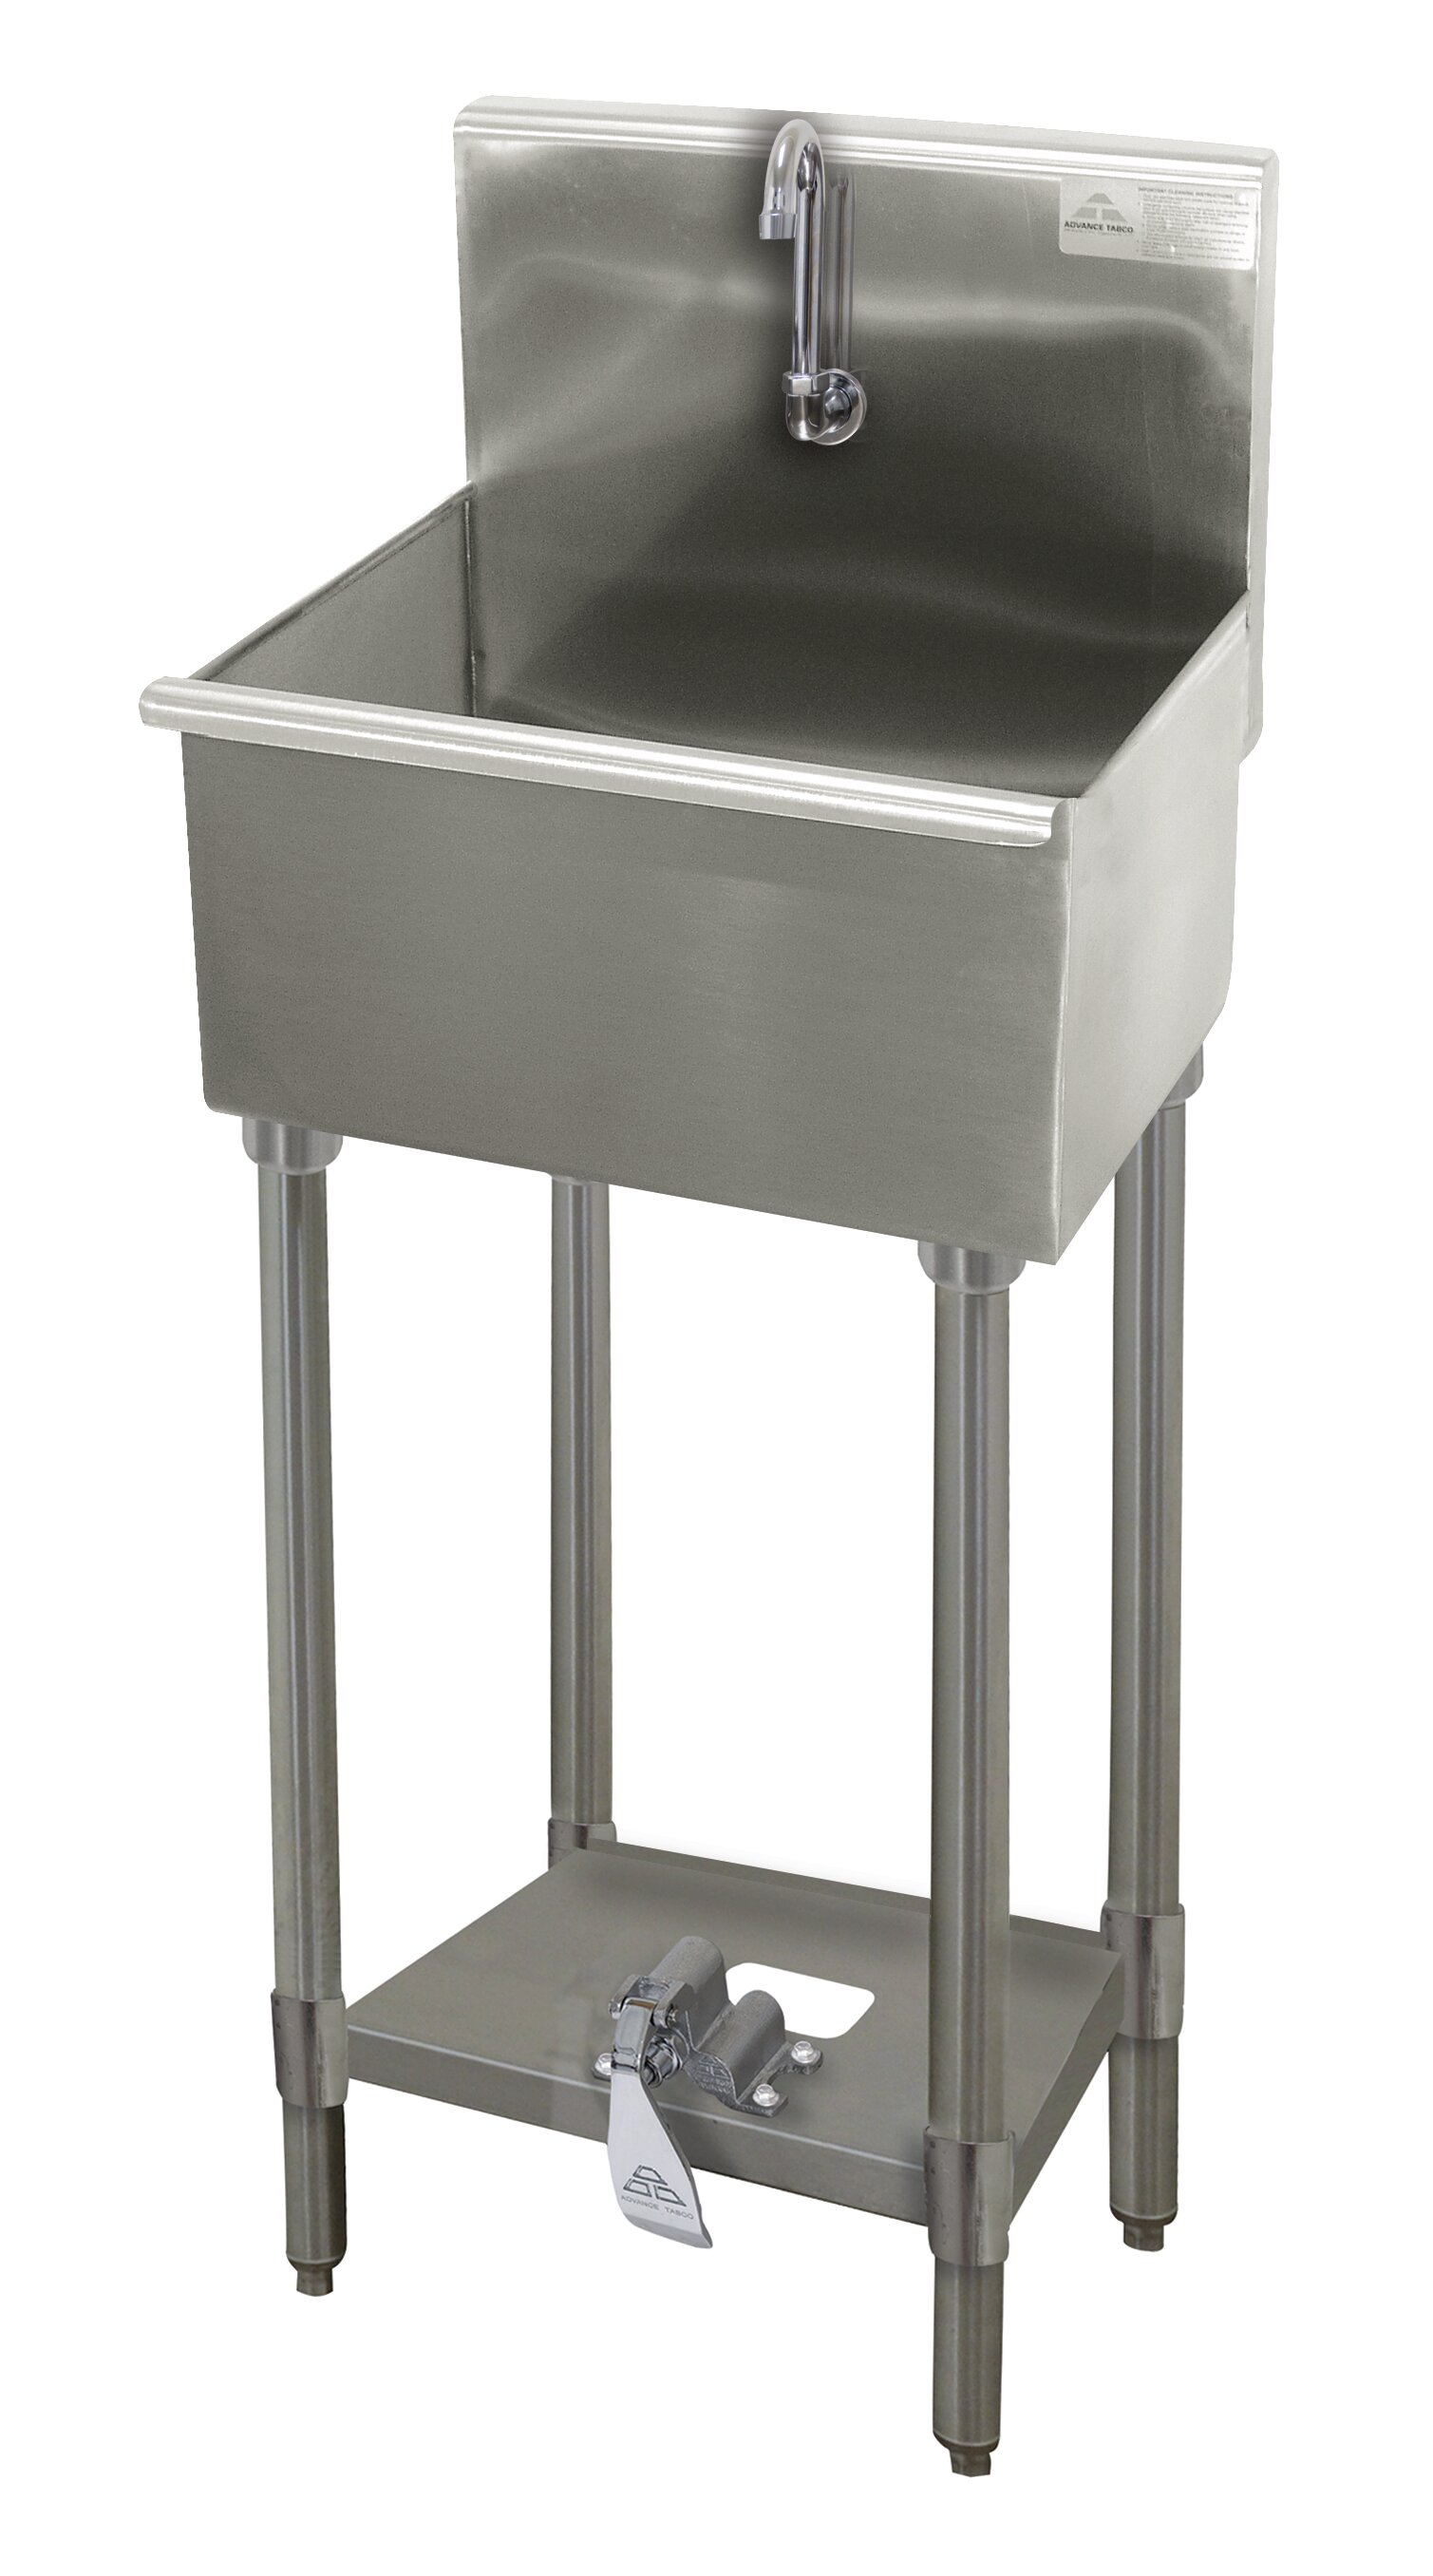 Foot Valve 18 X 19 5 Freestanding Handwash Station With Faucet